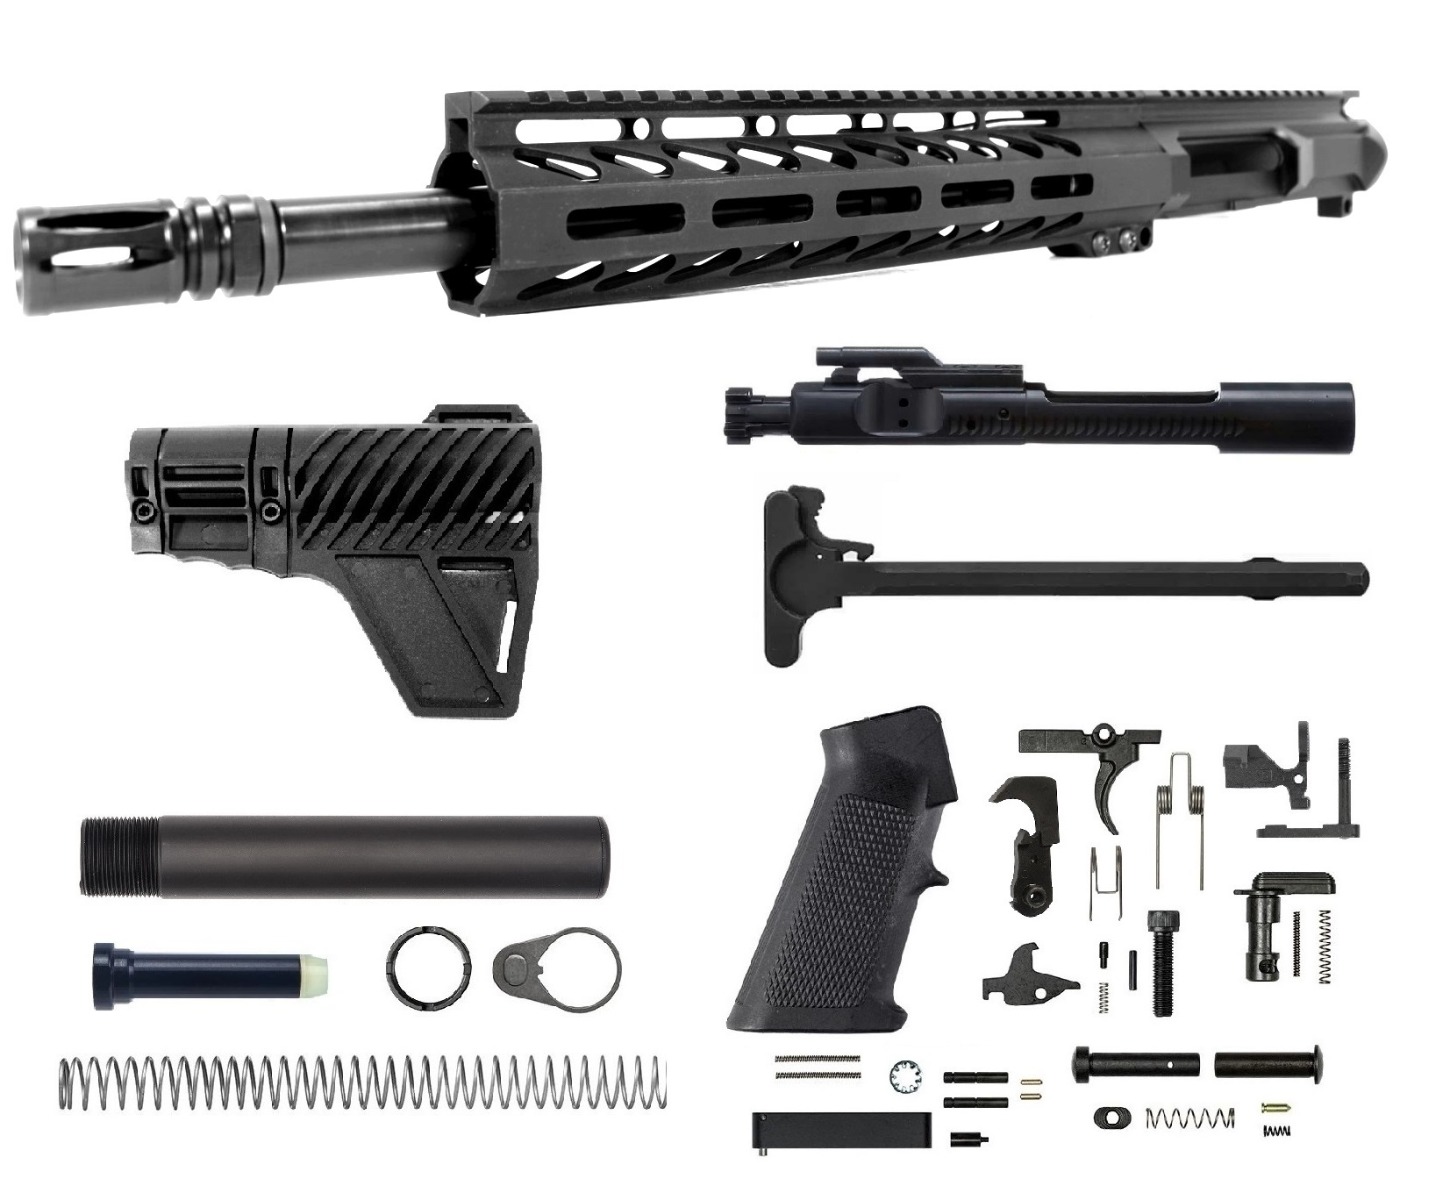 12.5 inch 300 Blackout Left Hand Upper Kit | Pro2a Tactical